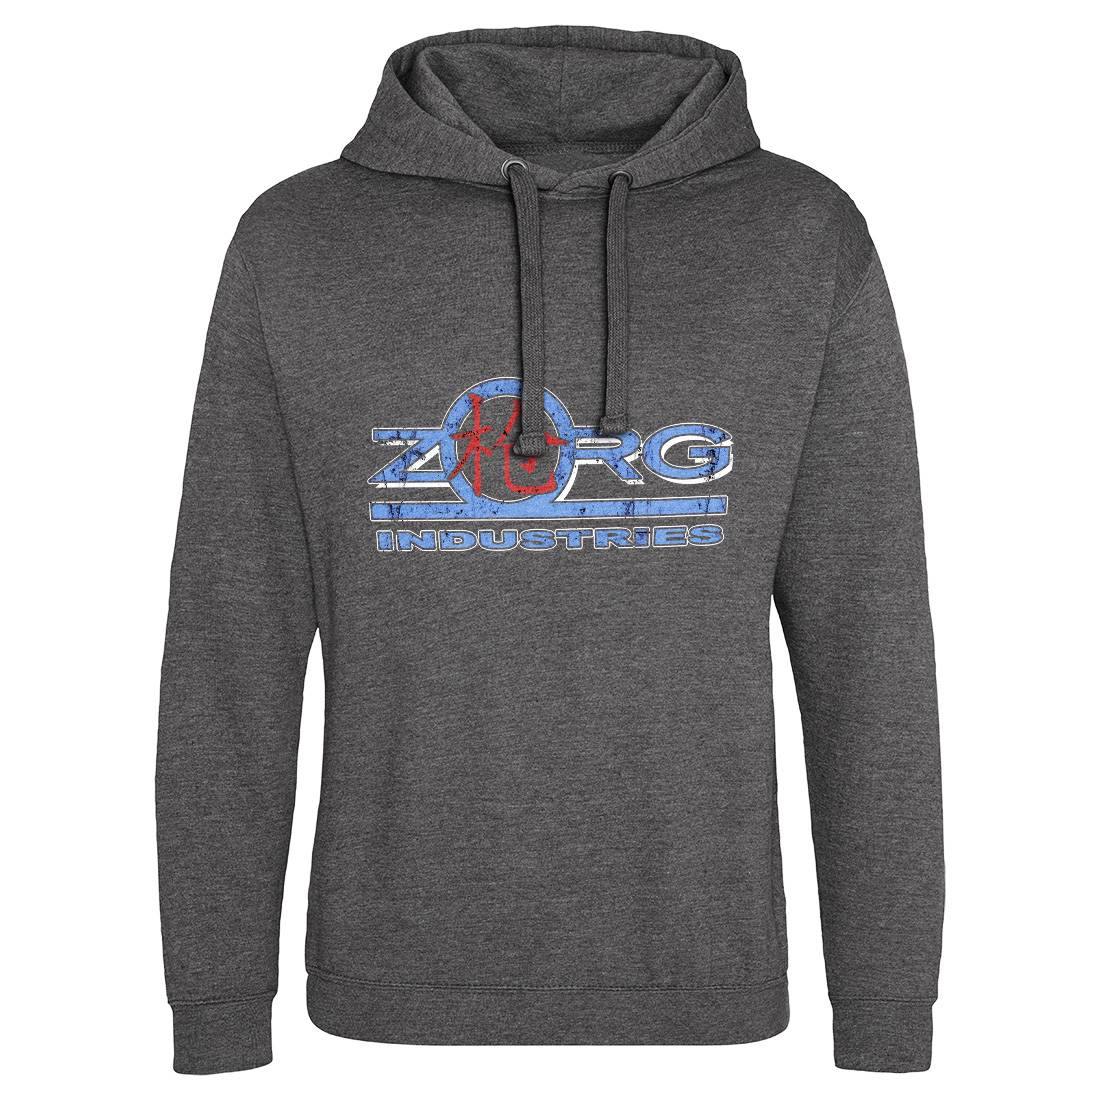 Zorg Ind Mens Hoodie Without Pocket Space D105